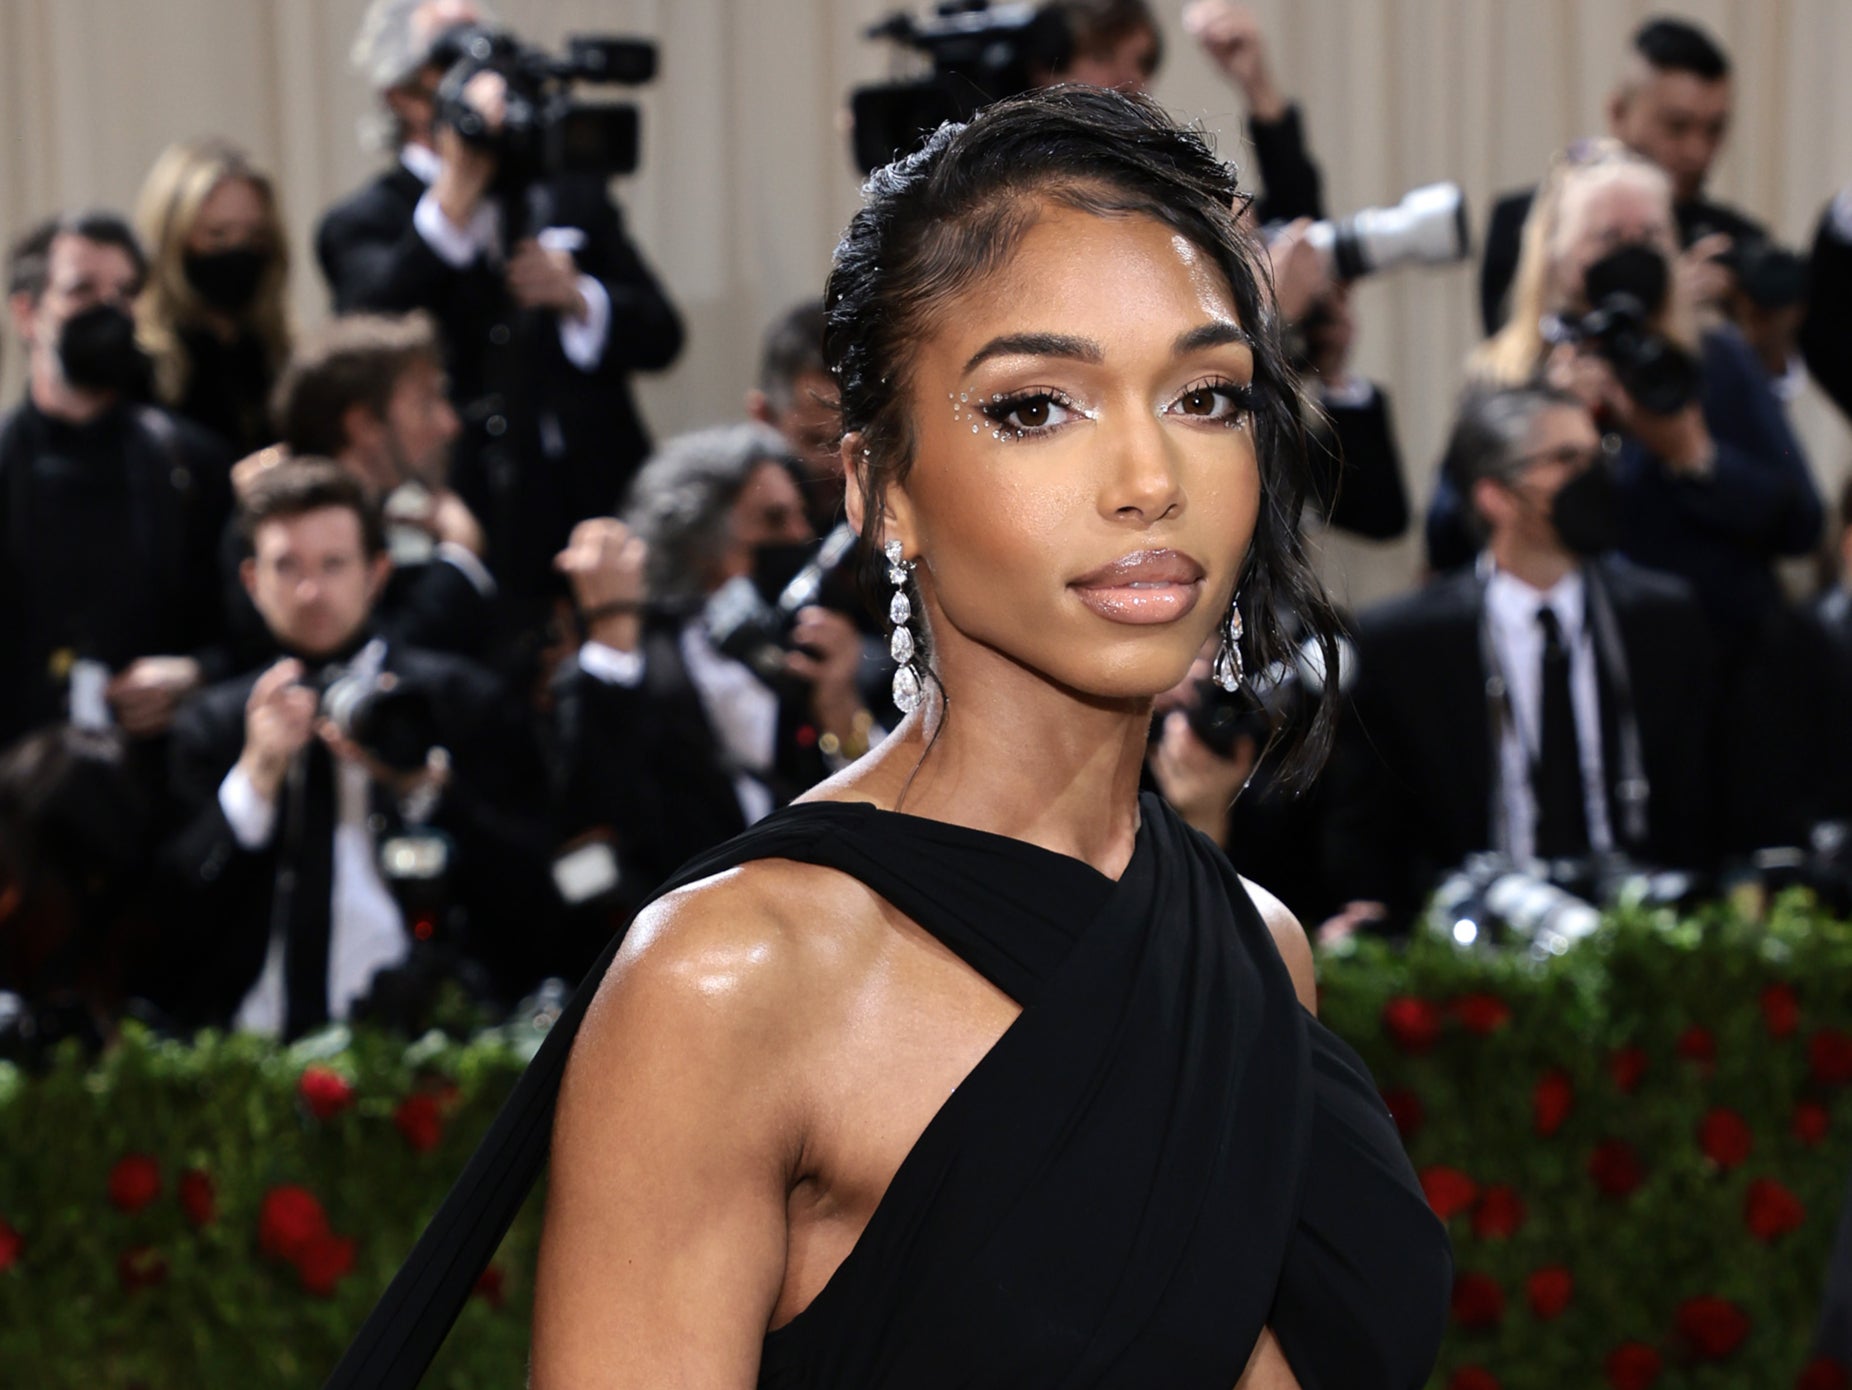 Lori Harvey says she's 'dating on her own terms' following Michael